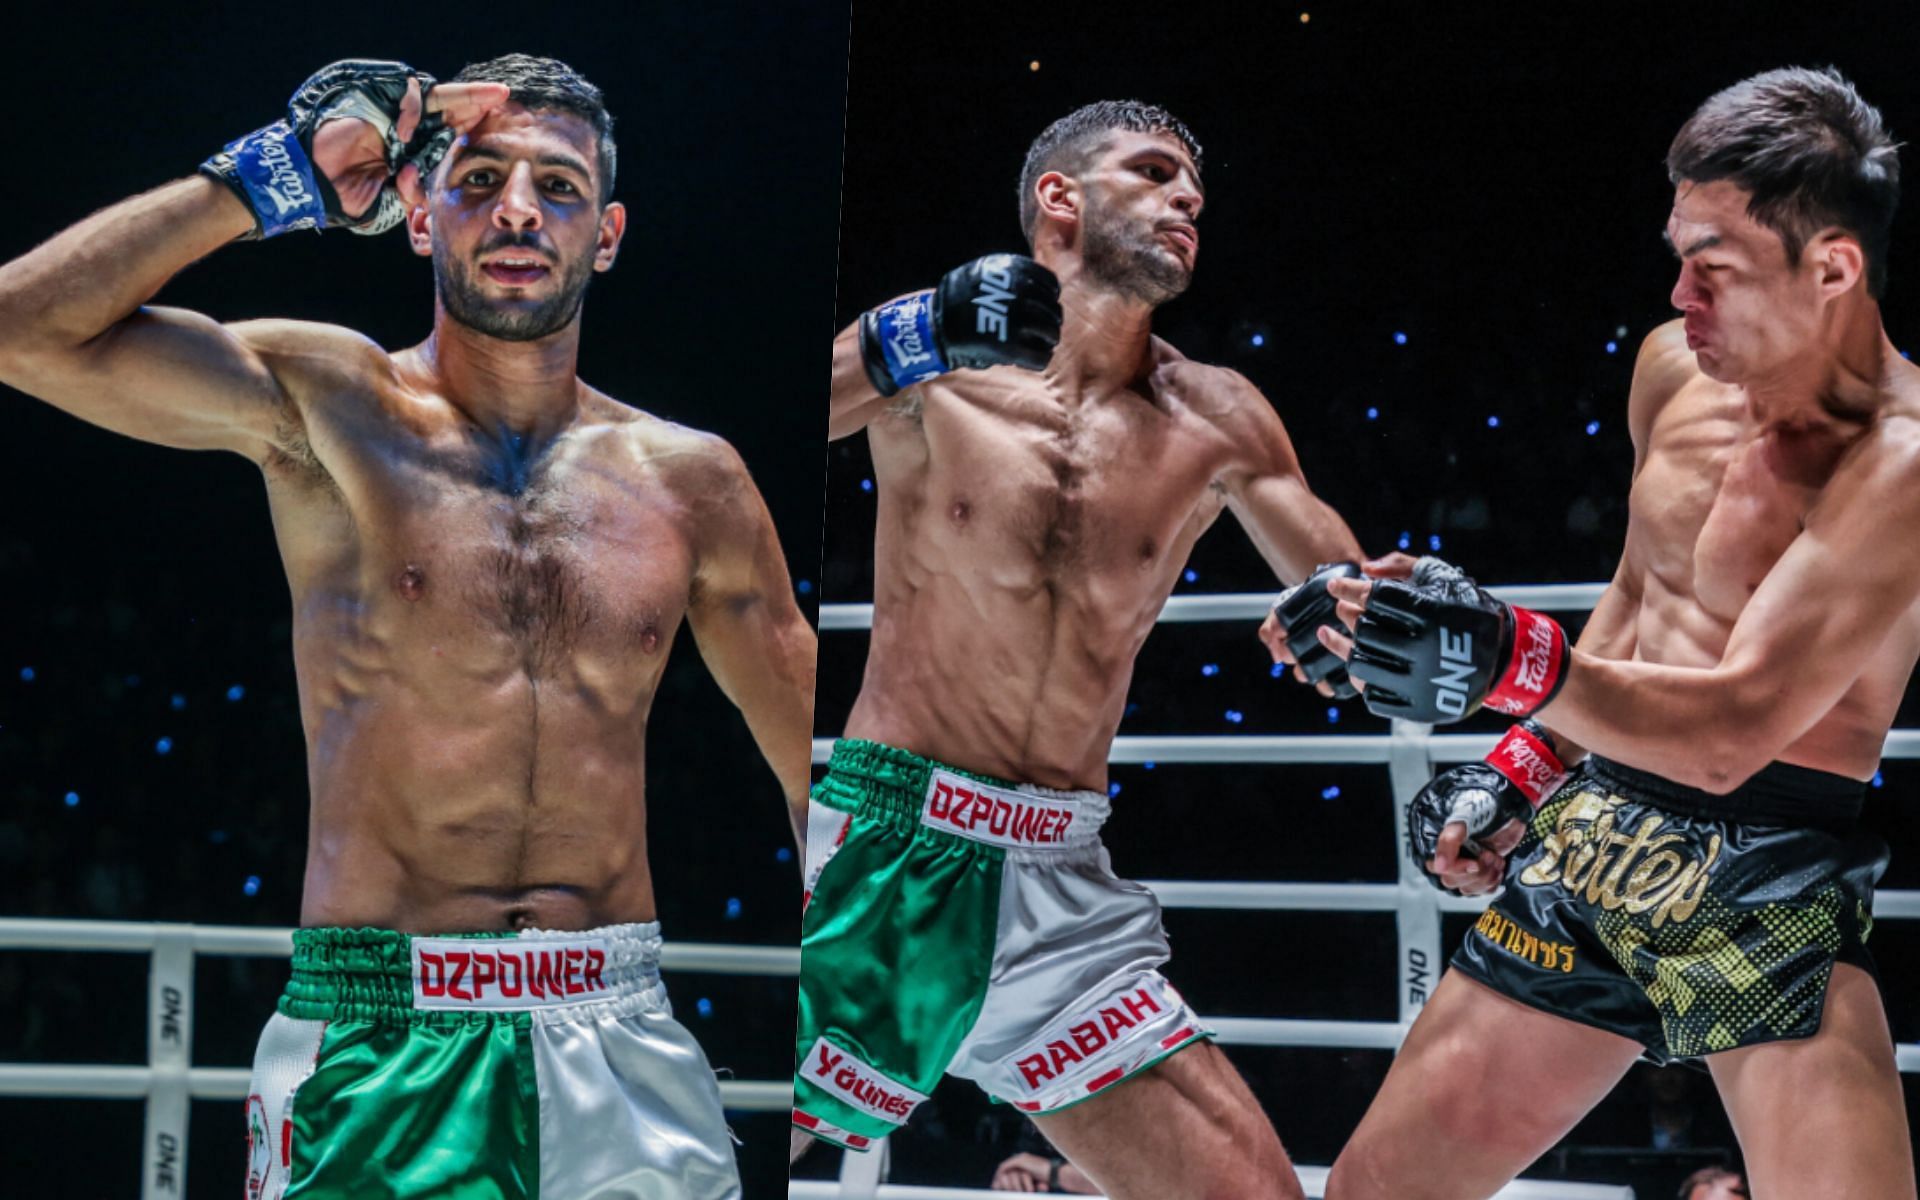 Algerian Mohamed Younes Rabah made a triumphant ONE Championship debut last week with an impressive knockout victory over Thai Saemapetch Fairtex. -- Photo by ONE Championship